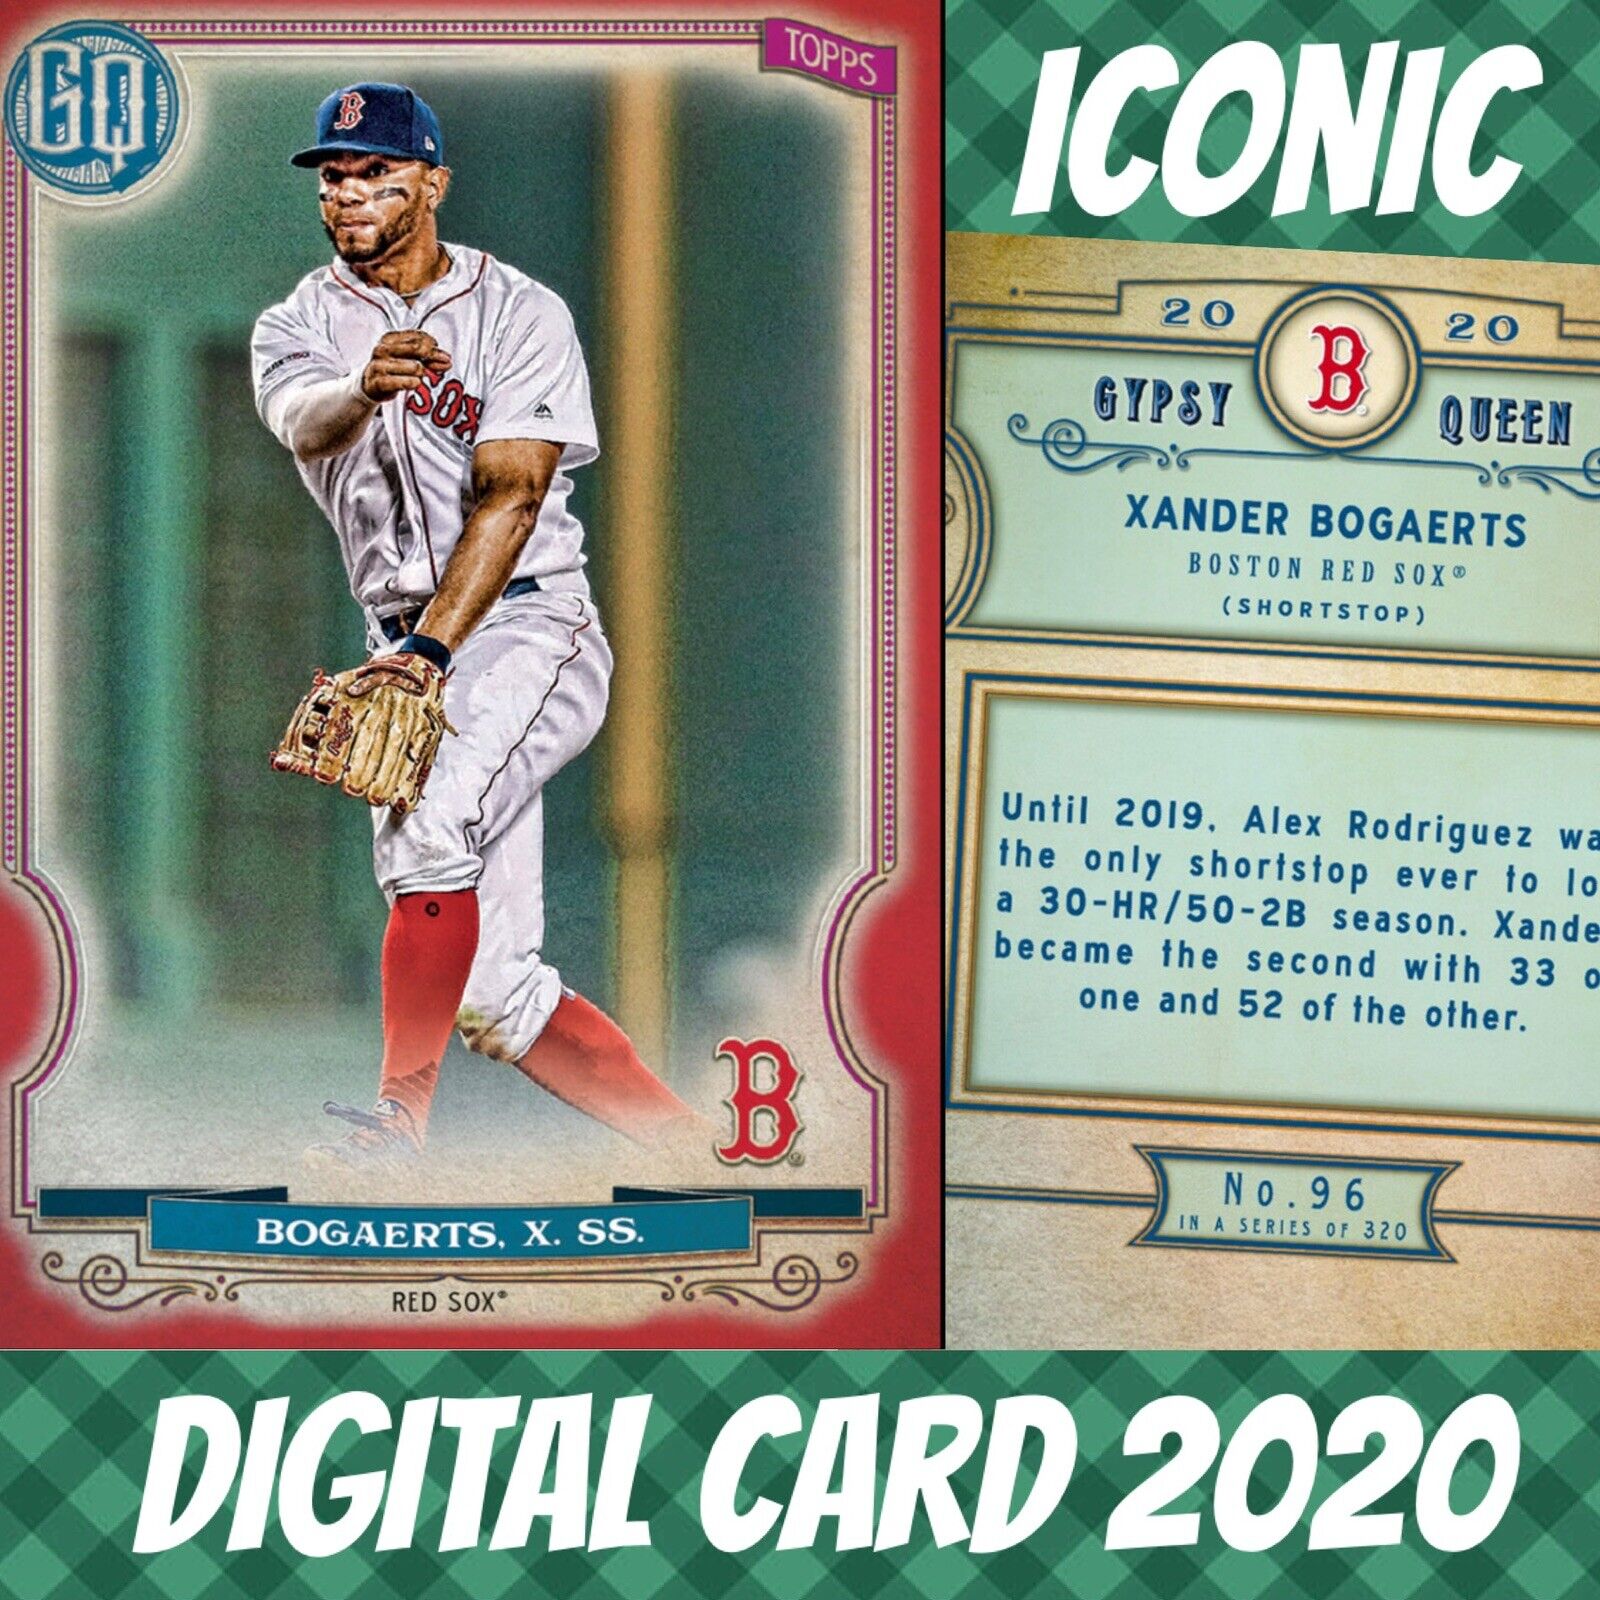 2020 Topps Colorful 20 Xander Bogaerts Gypsy Queen Red Base Iconic Digital Card